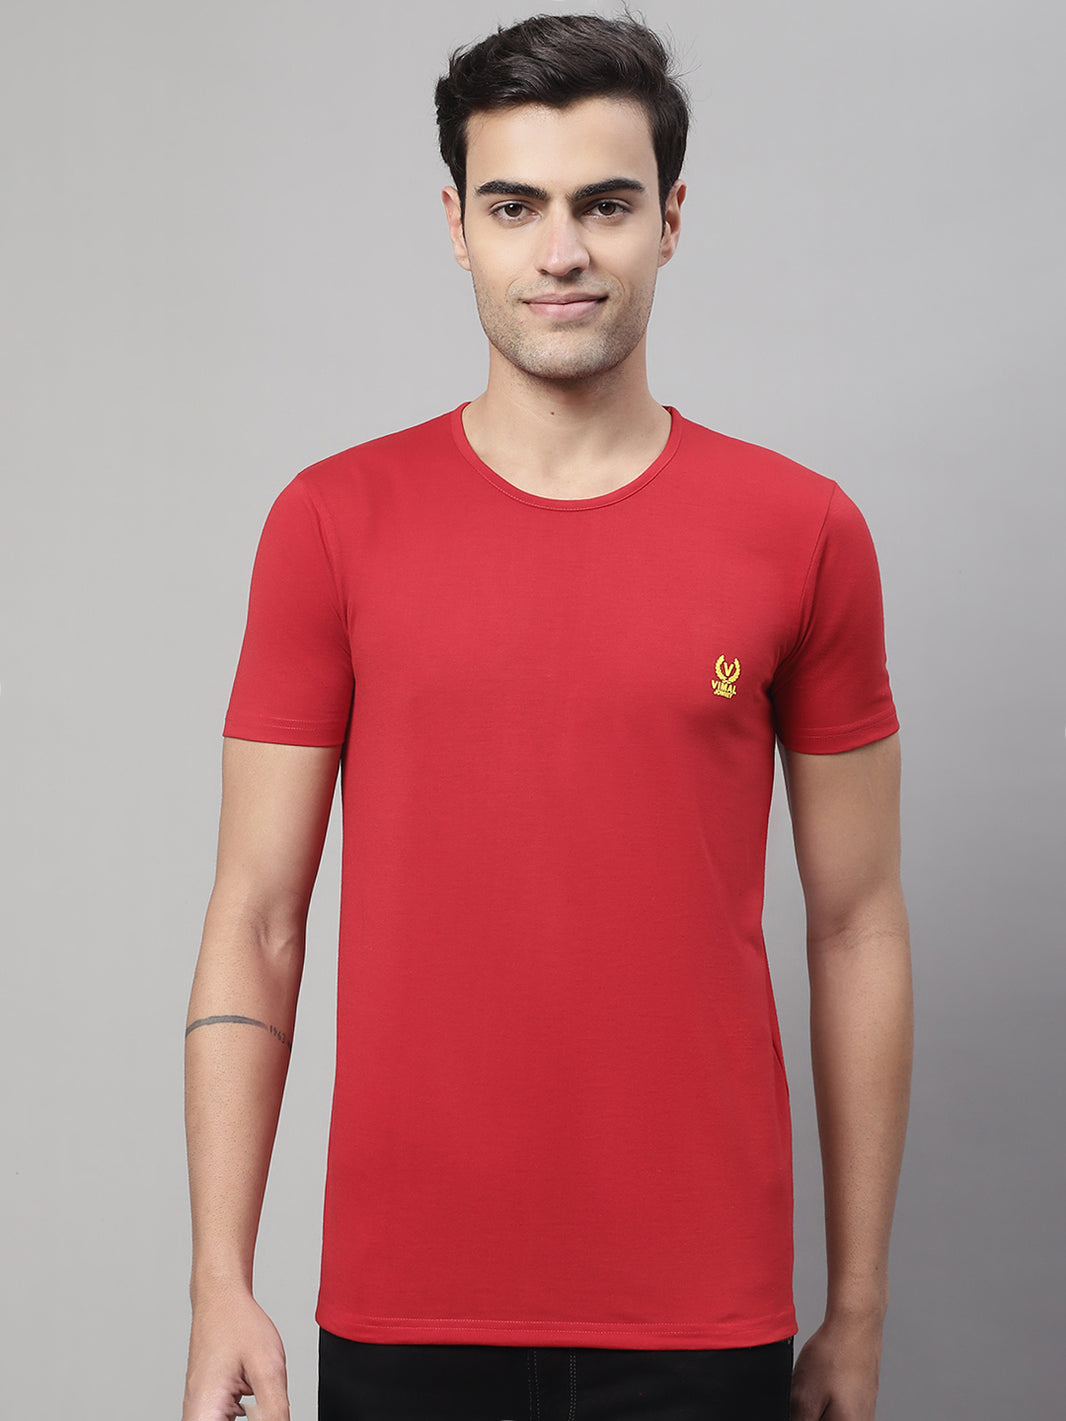 Vimal Jonney Round Neck Cotton Solid Red T-Shirt for Men